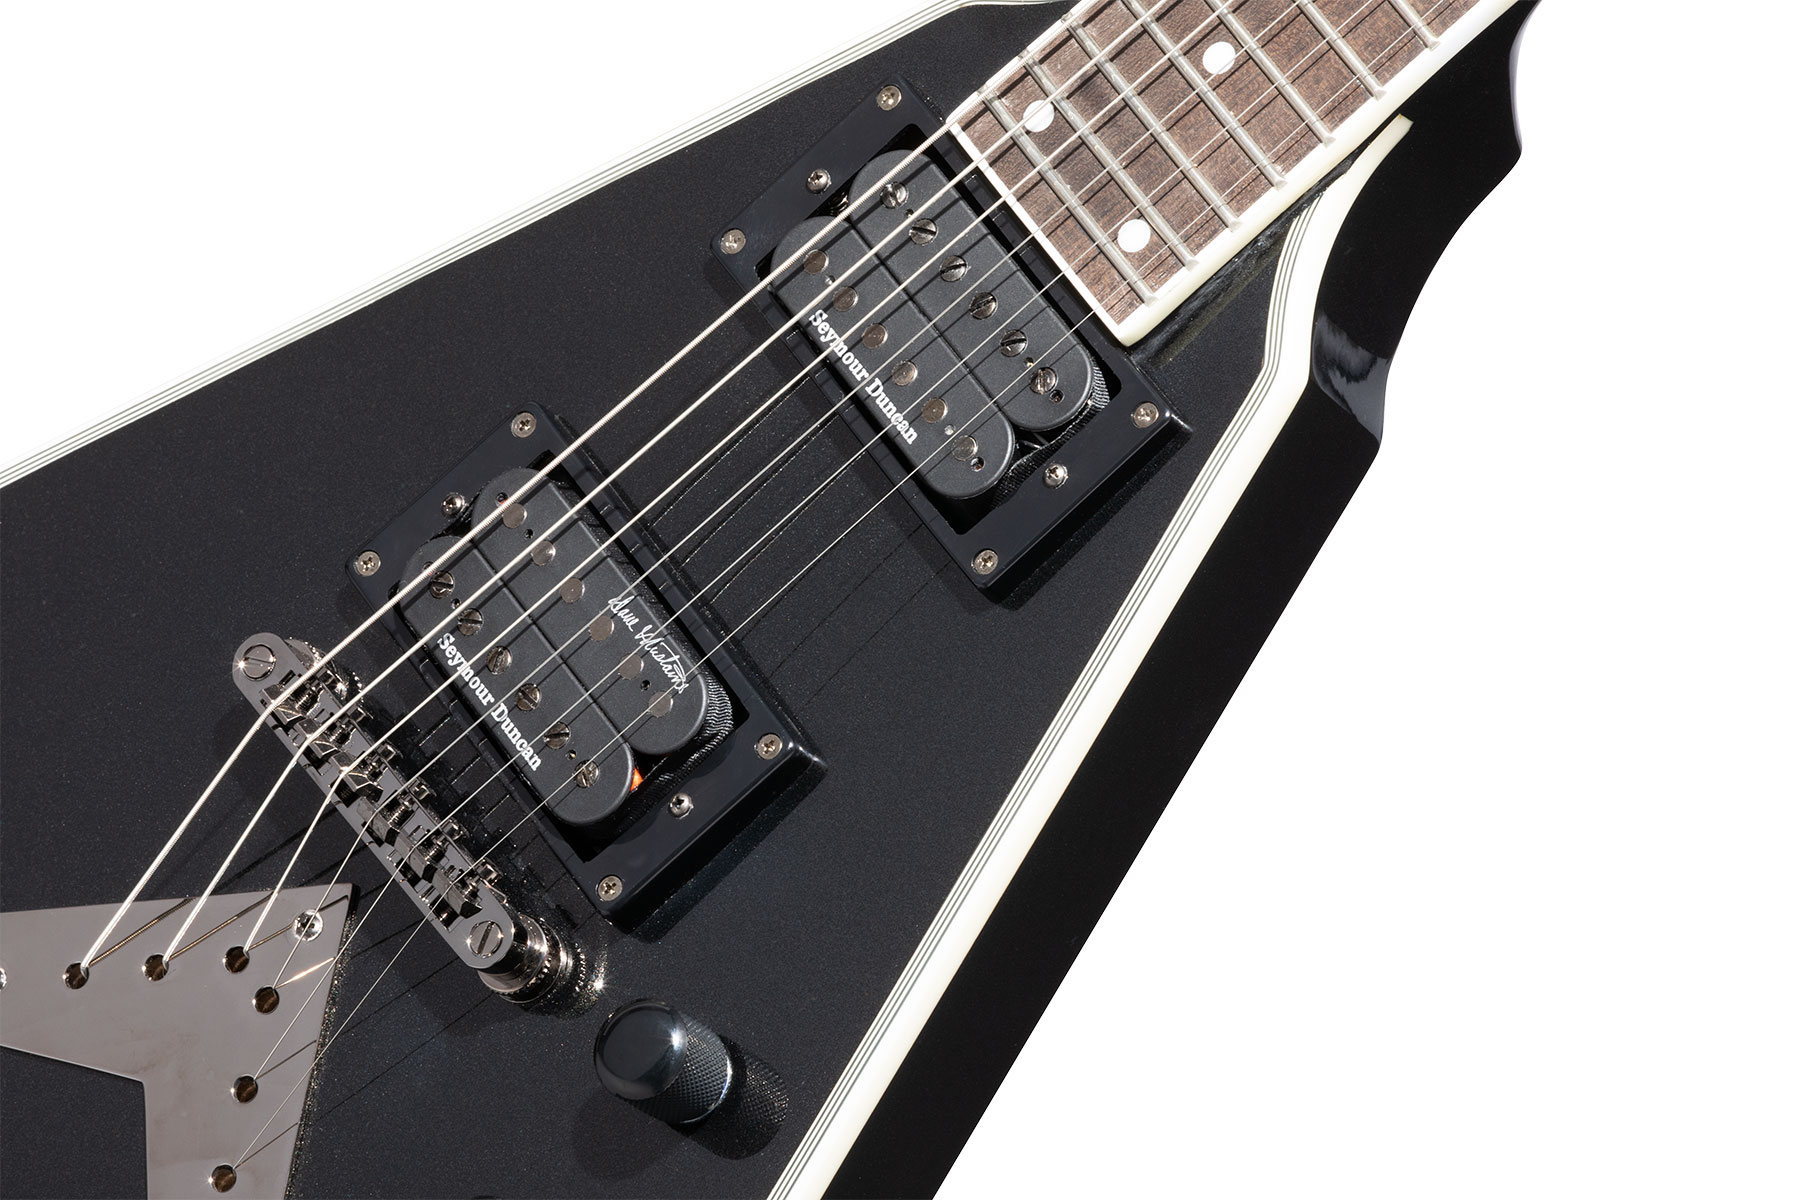 Epiphone Dave Mustaine Flying V Prophecy 2h Fishman Fluence Ht Eb - Black Metallic - Guitarra electrica metalica - Variation 4